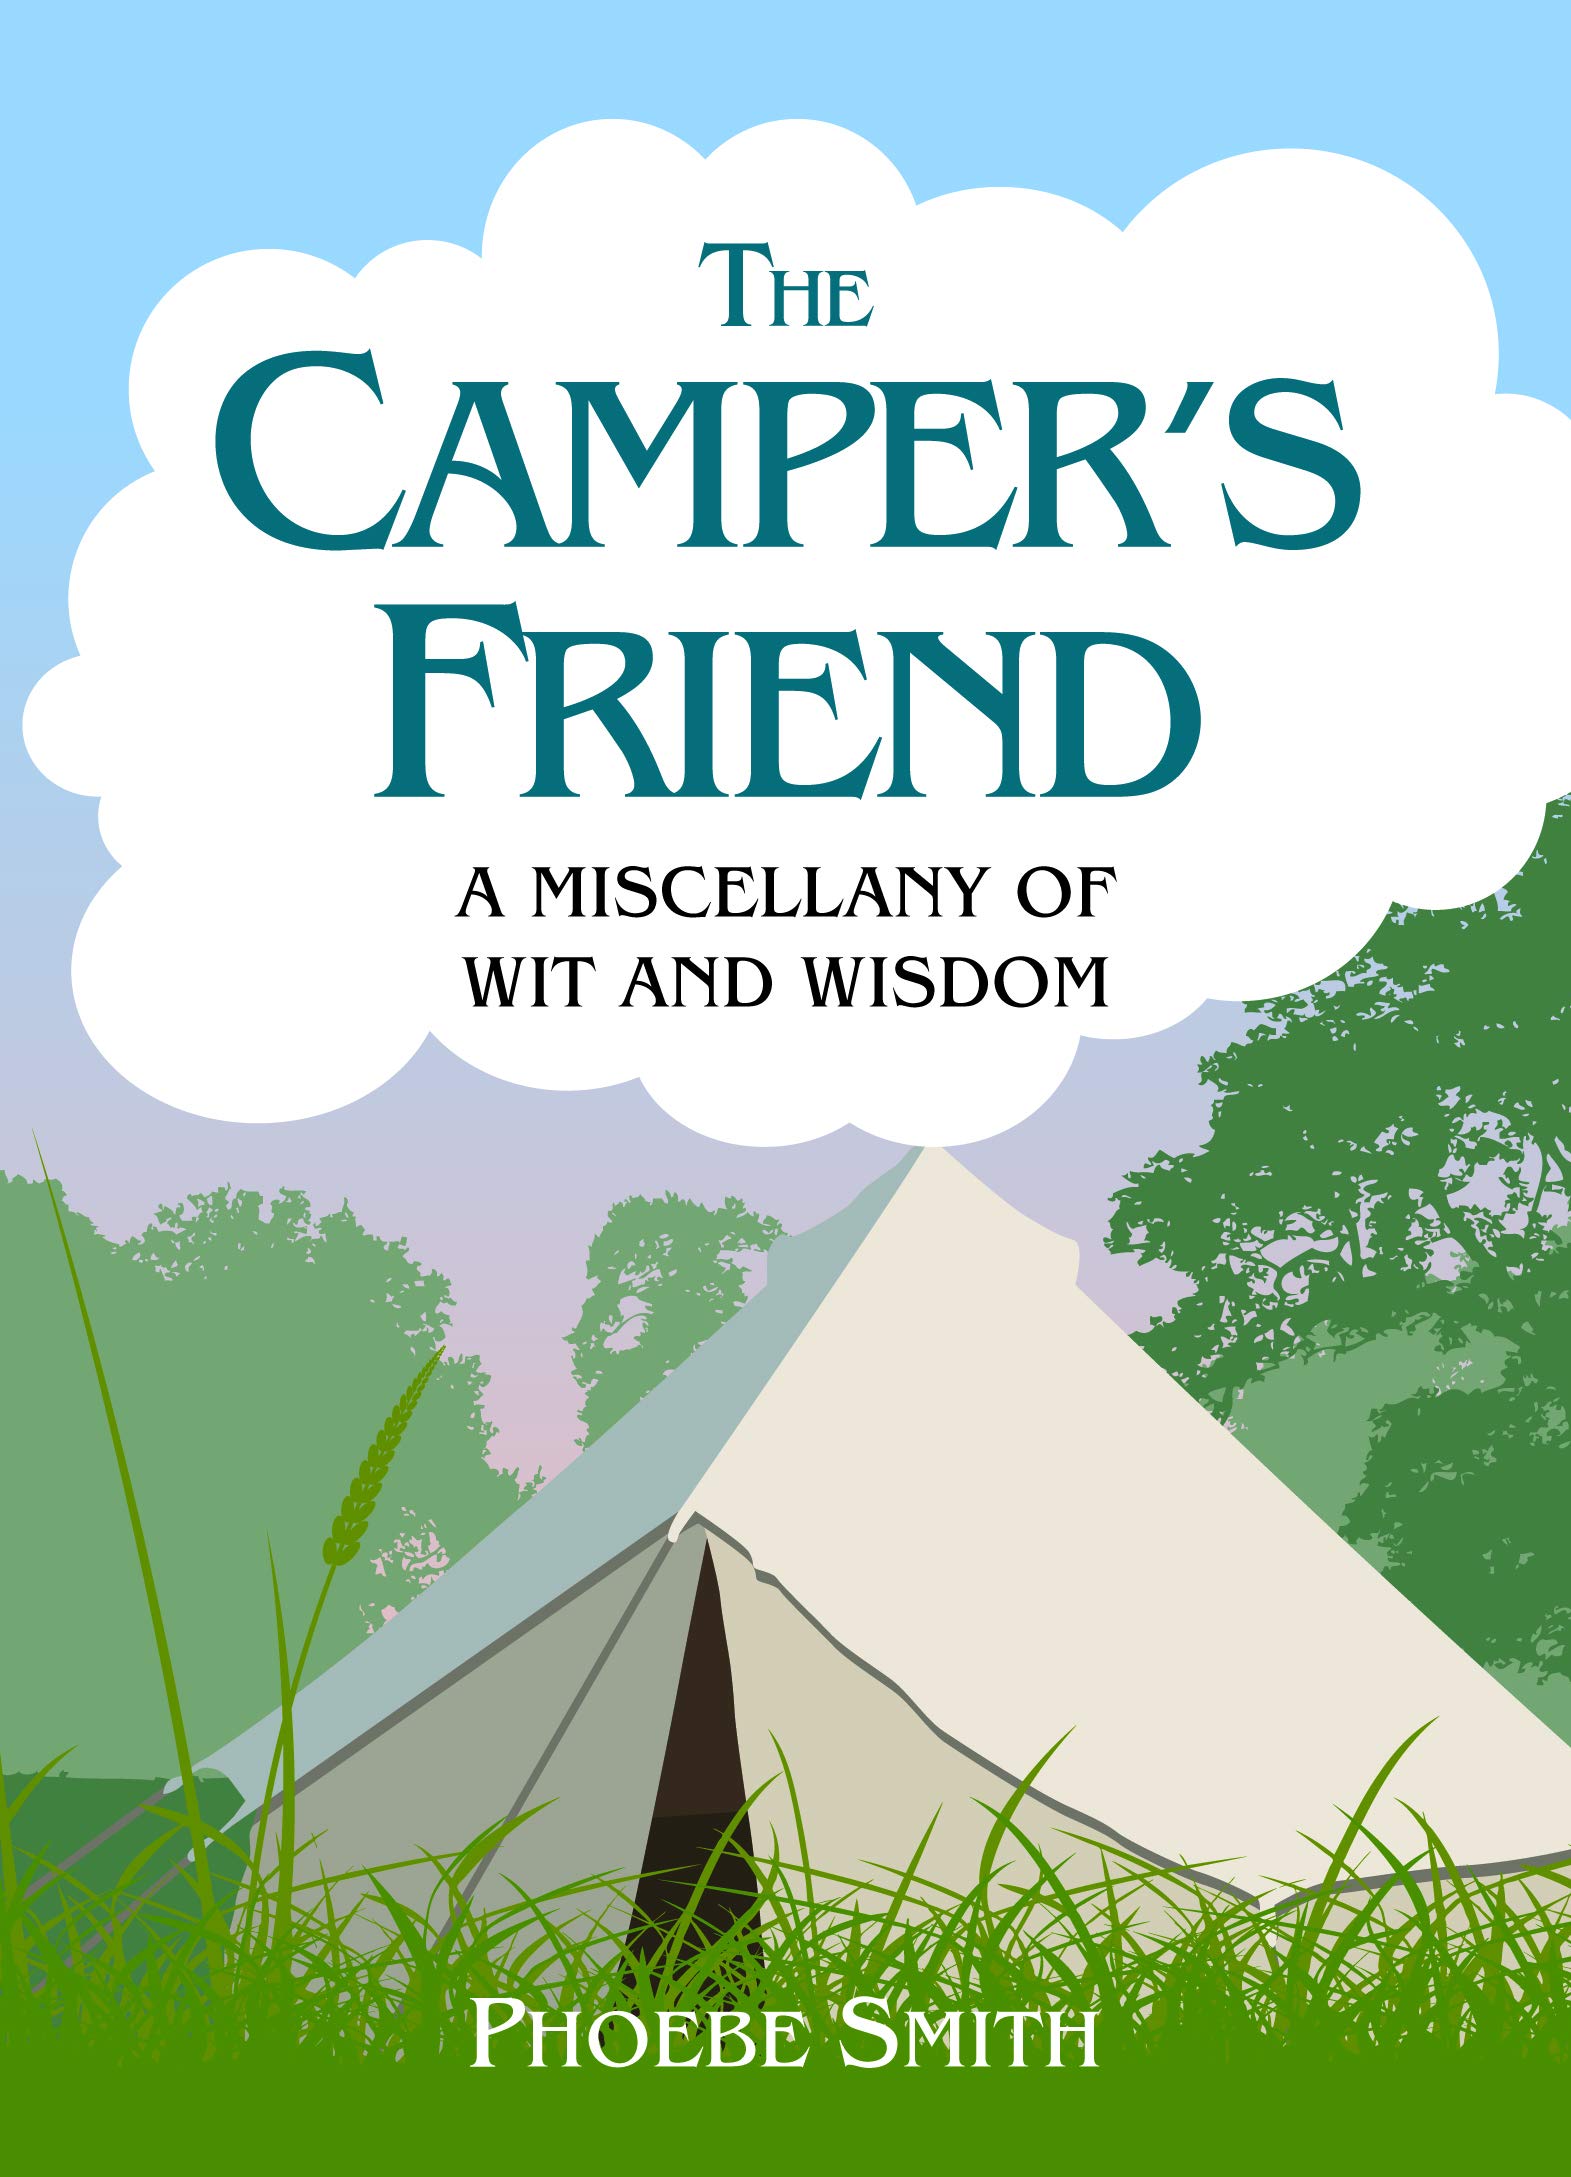 The Camper's Friend: A Miscellany of Wit and Wisdom - Phoebe Smith